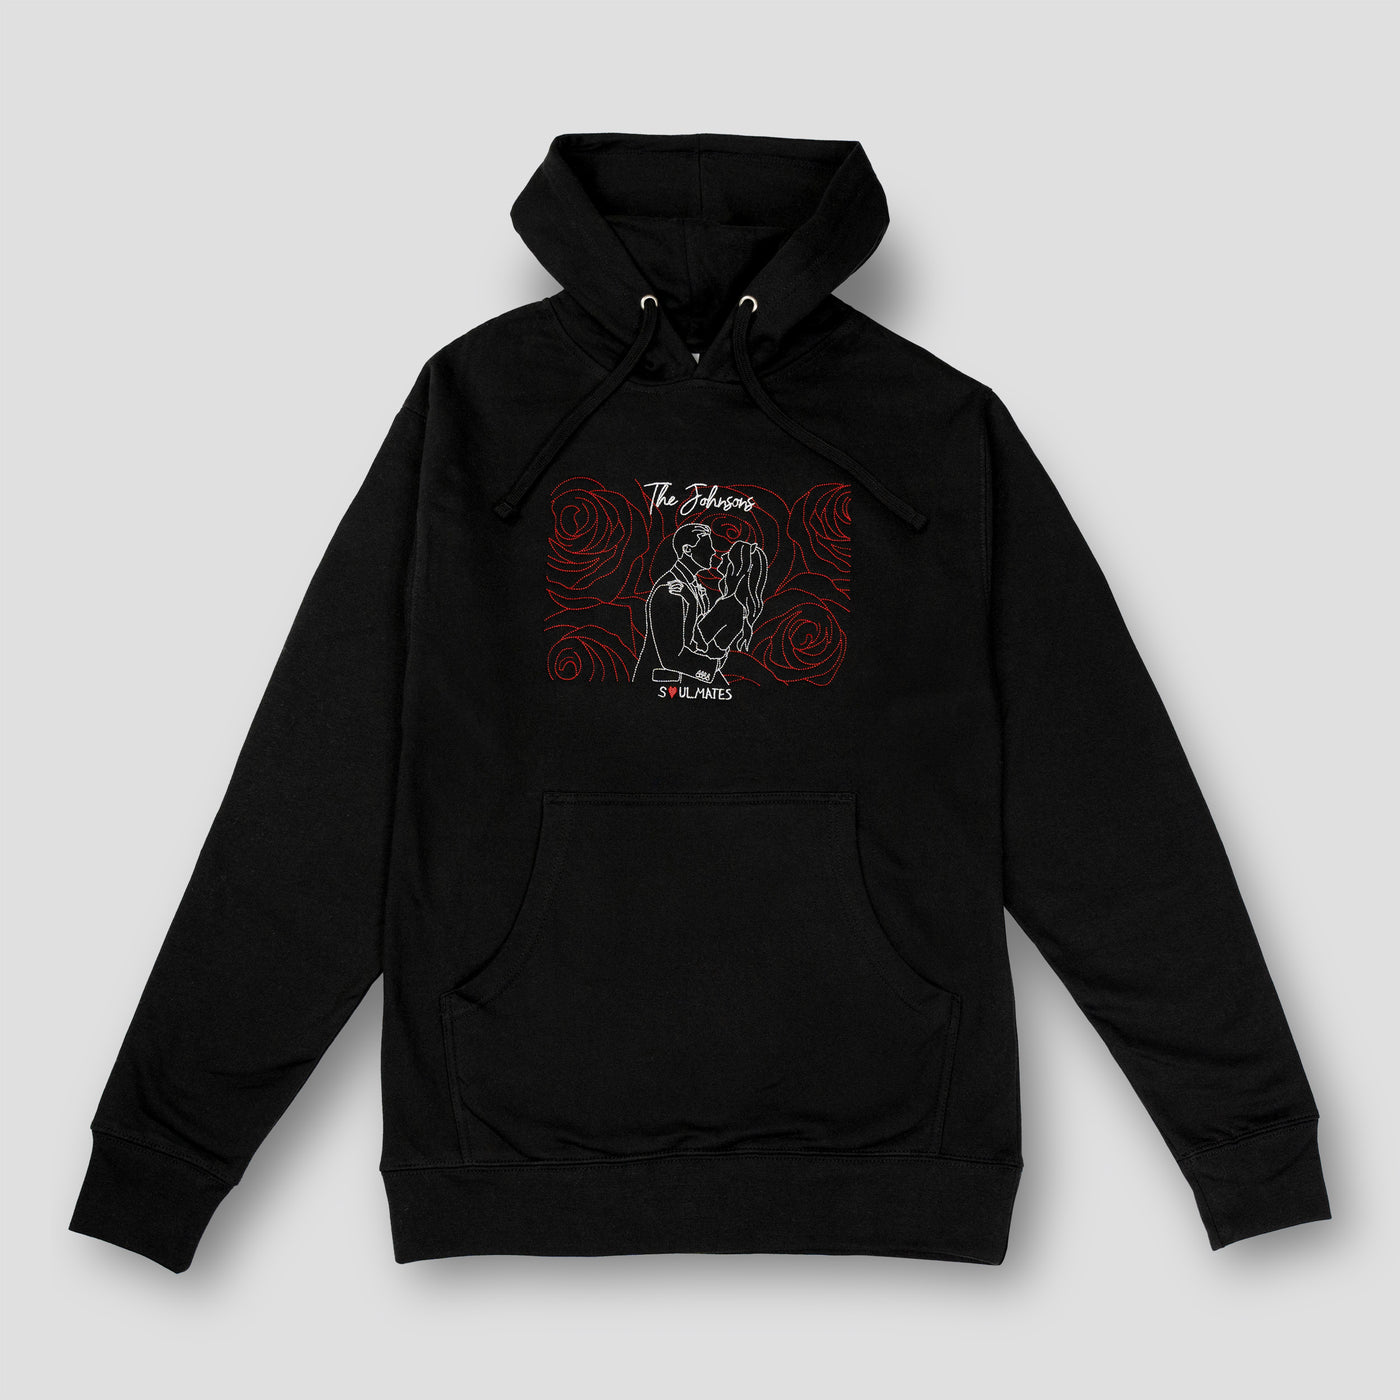 Black embroidered Soulmate Customs hoodie with couple outline includes backround image in outline